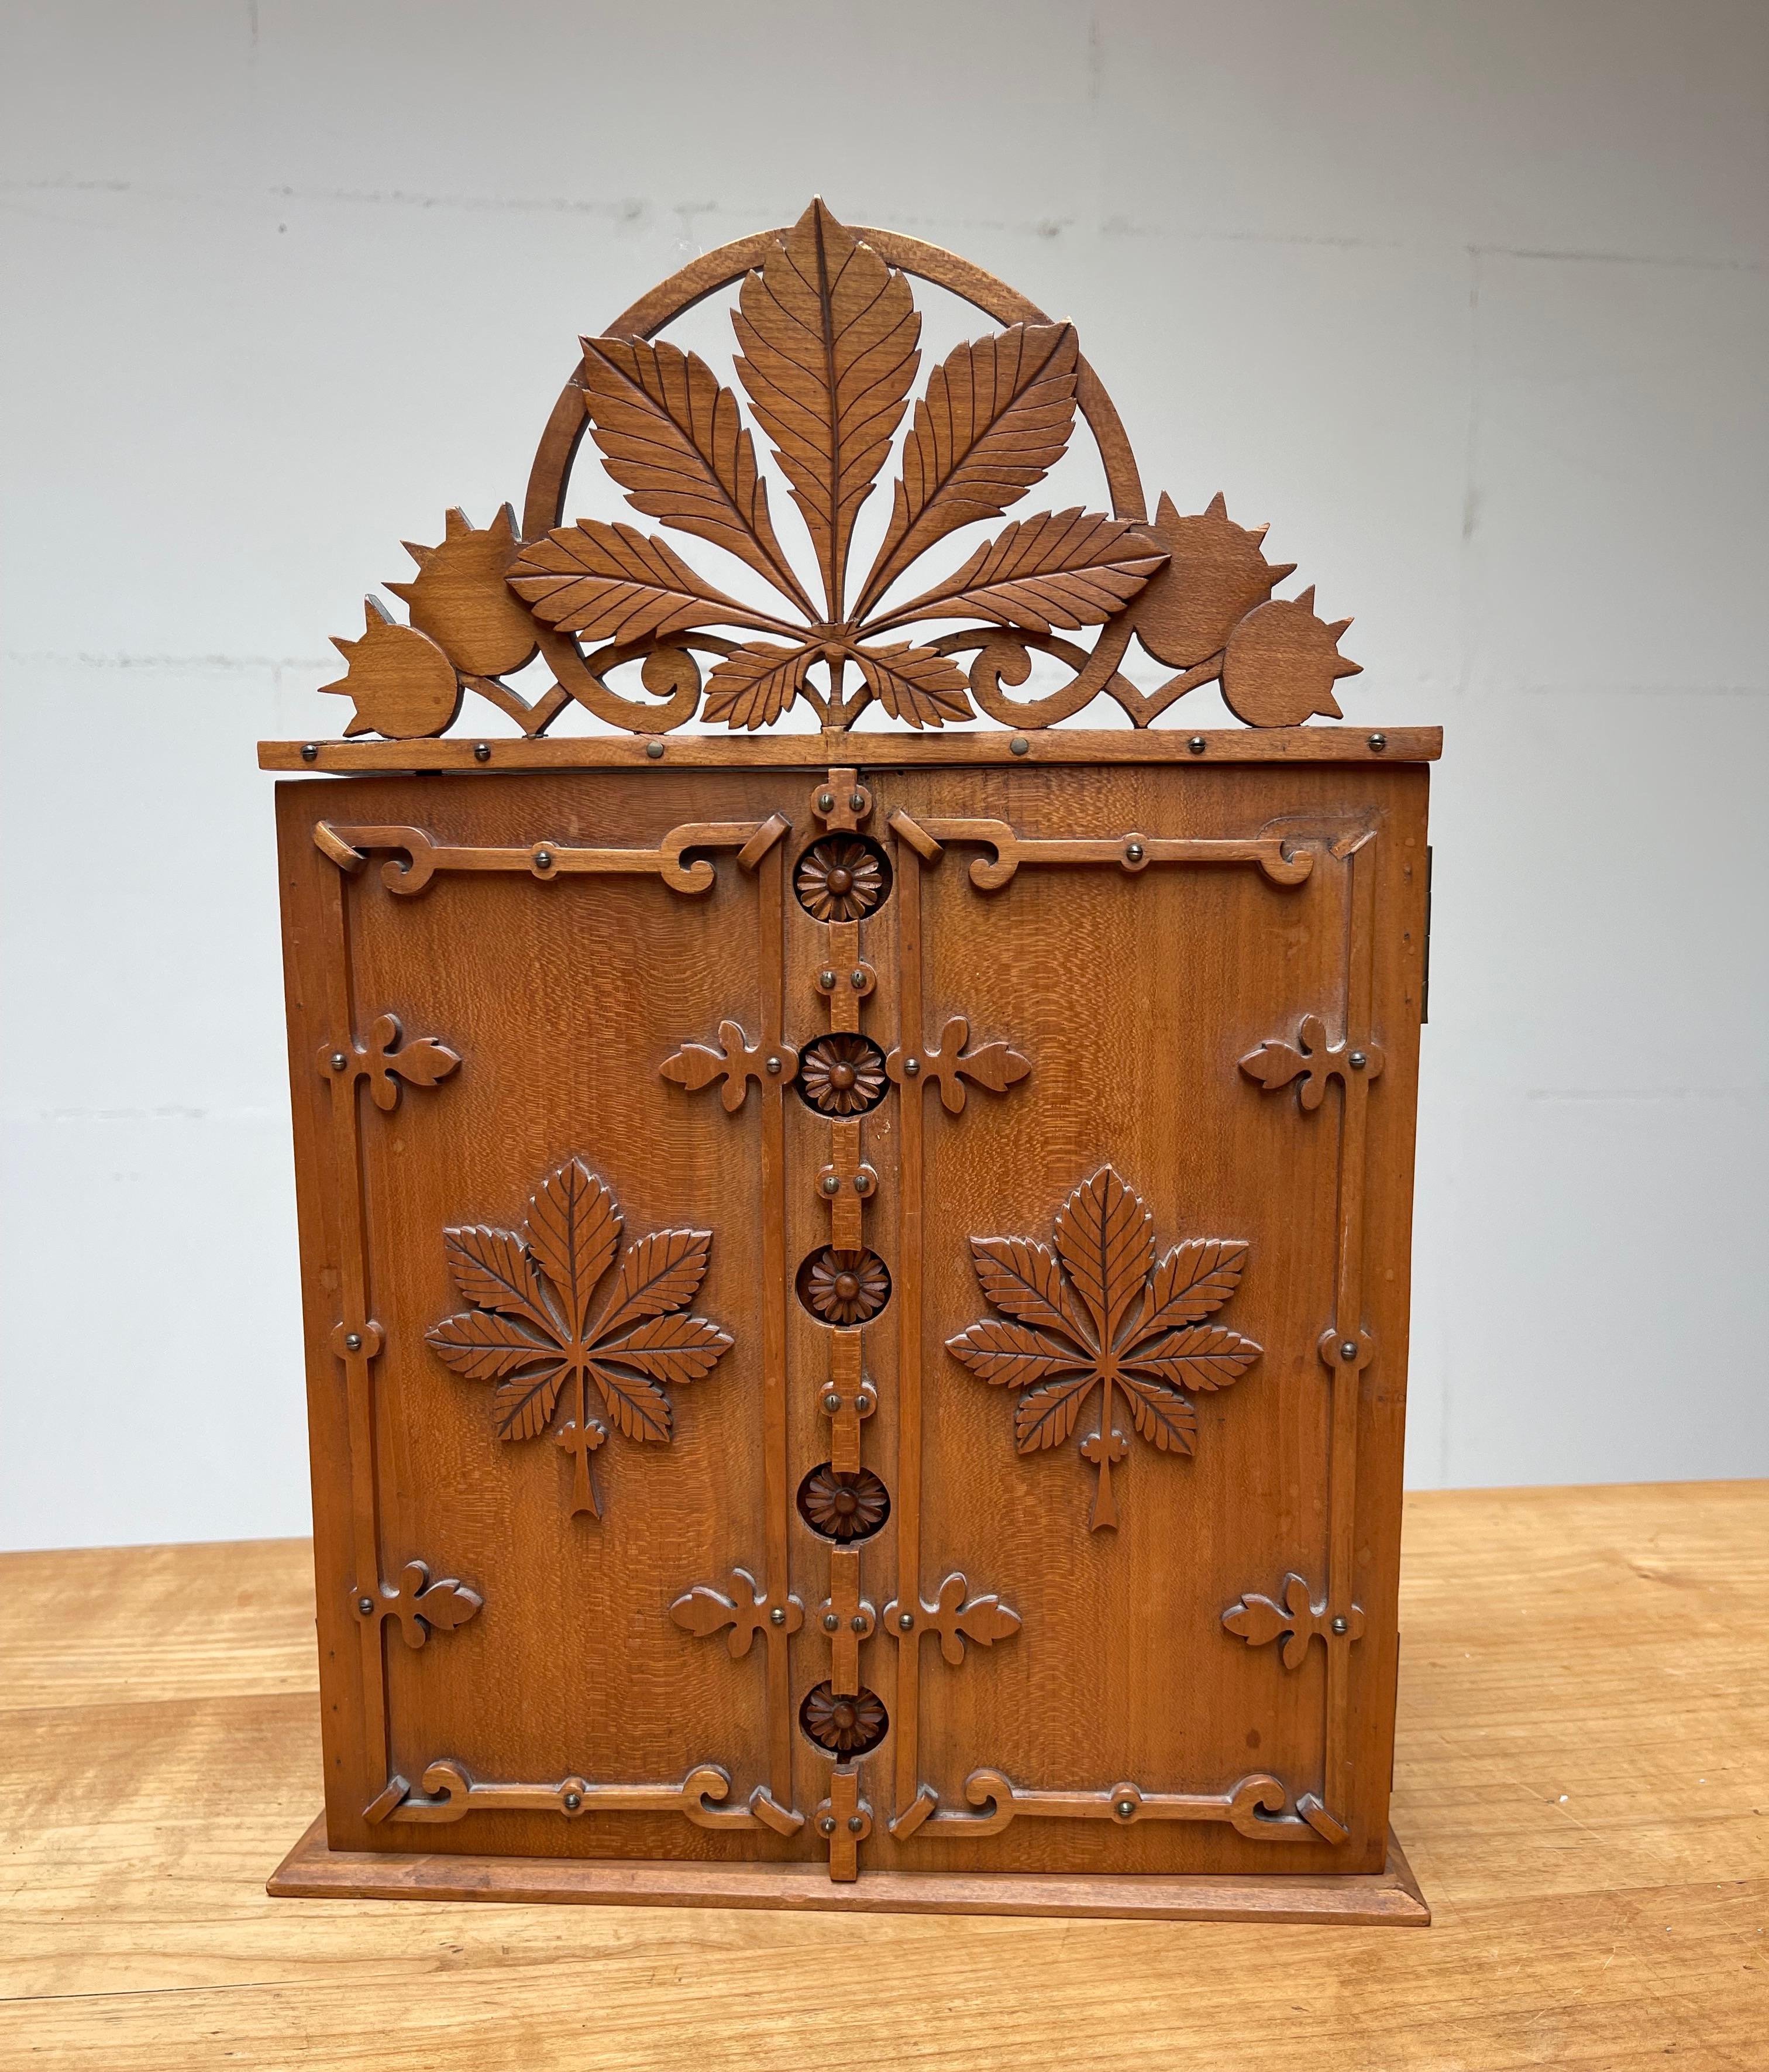 Unique and perfectly handcrafted between 1900 and 1920.

This small, but stunning chest(nut) of drawers is another one of our recent great finds. The details in this miniature cabinet show the incredible skill of its maker and the look and feel of